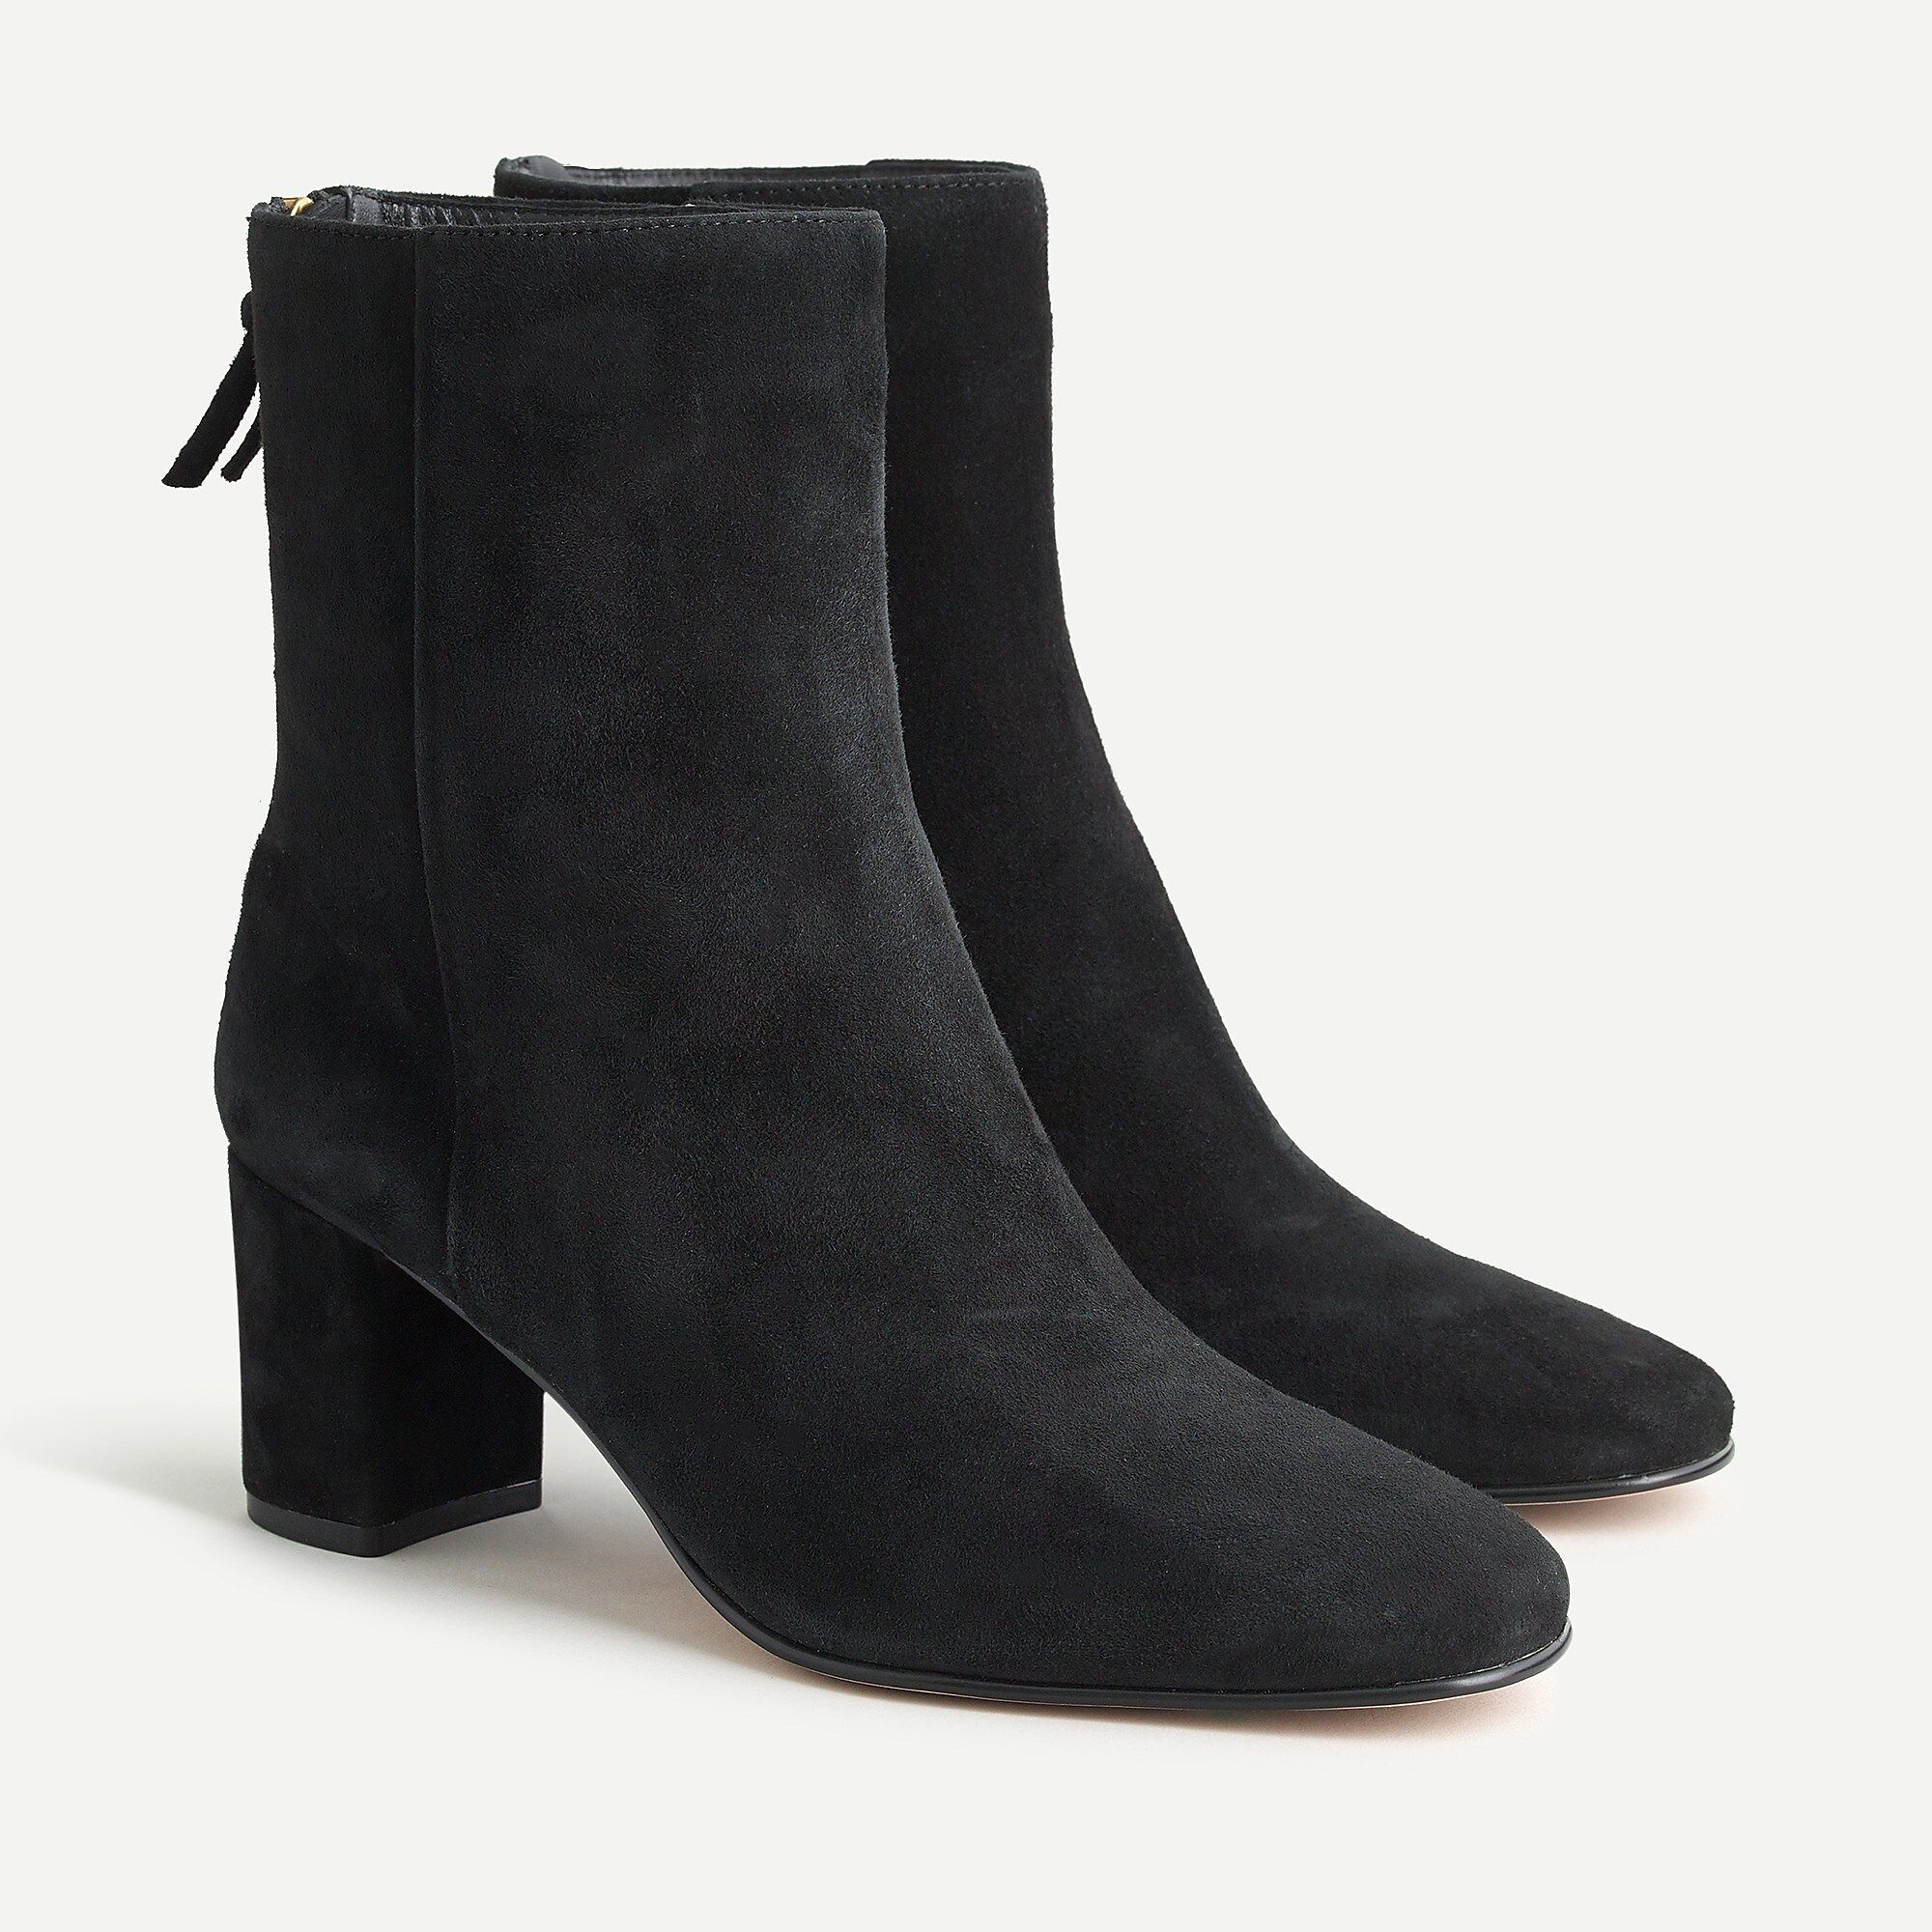 Ankle boots | J.Crew US